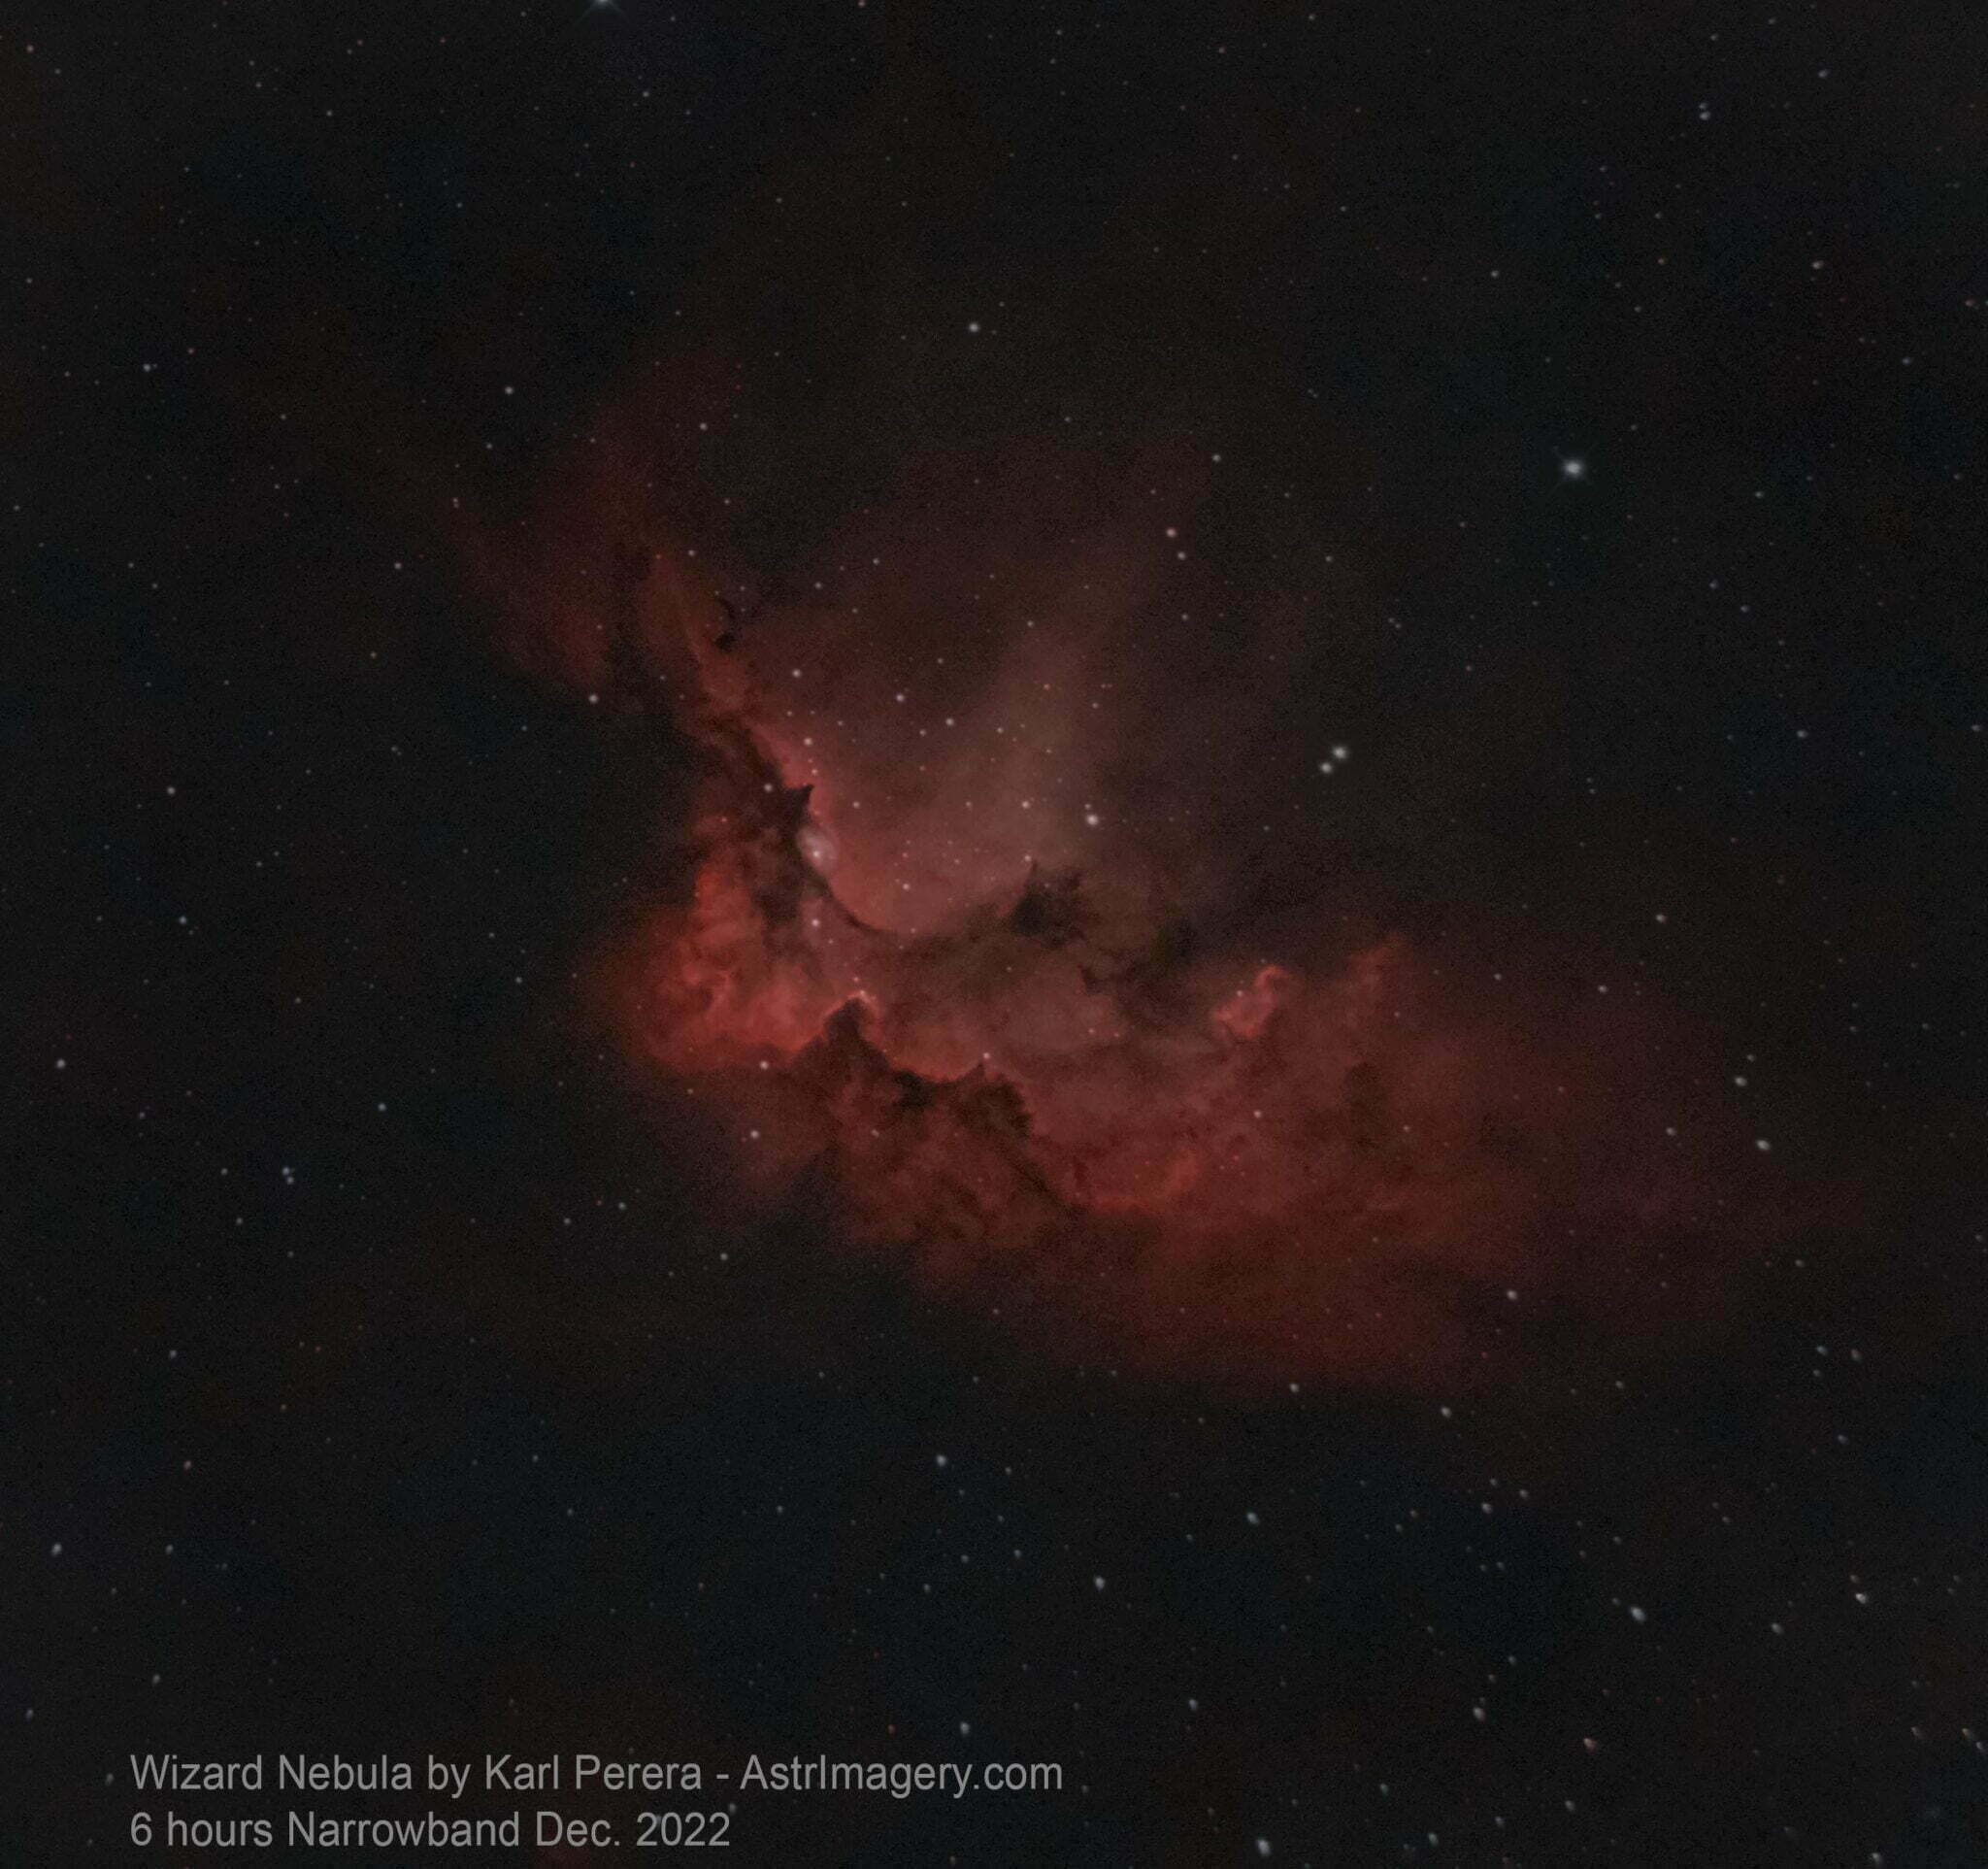 wizard nebula taken with cooled camera but no Astrophotography Calibration Frames